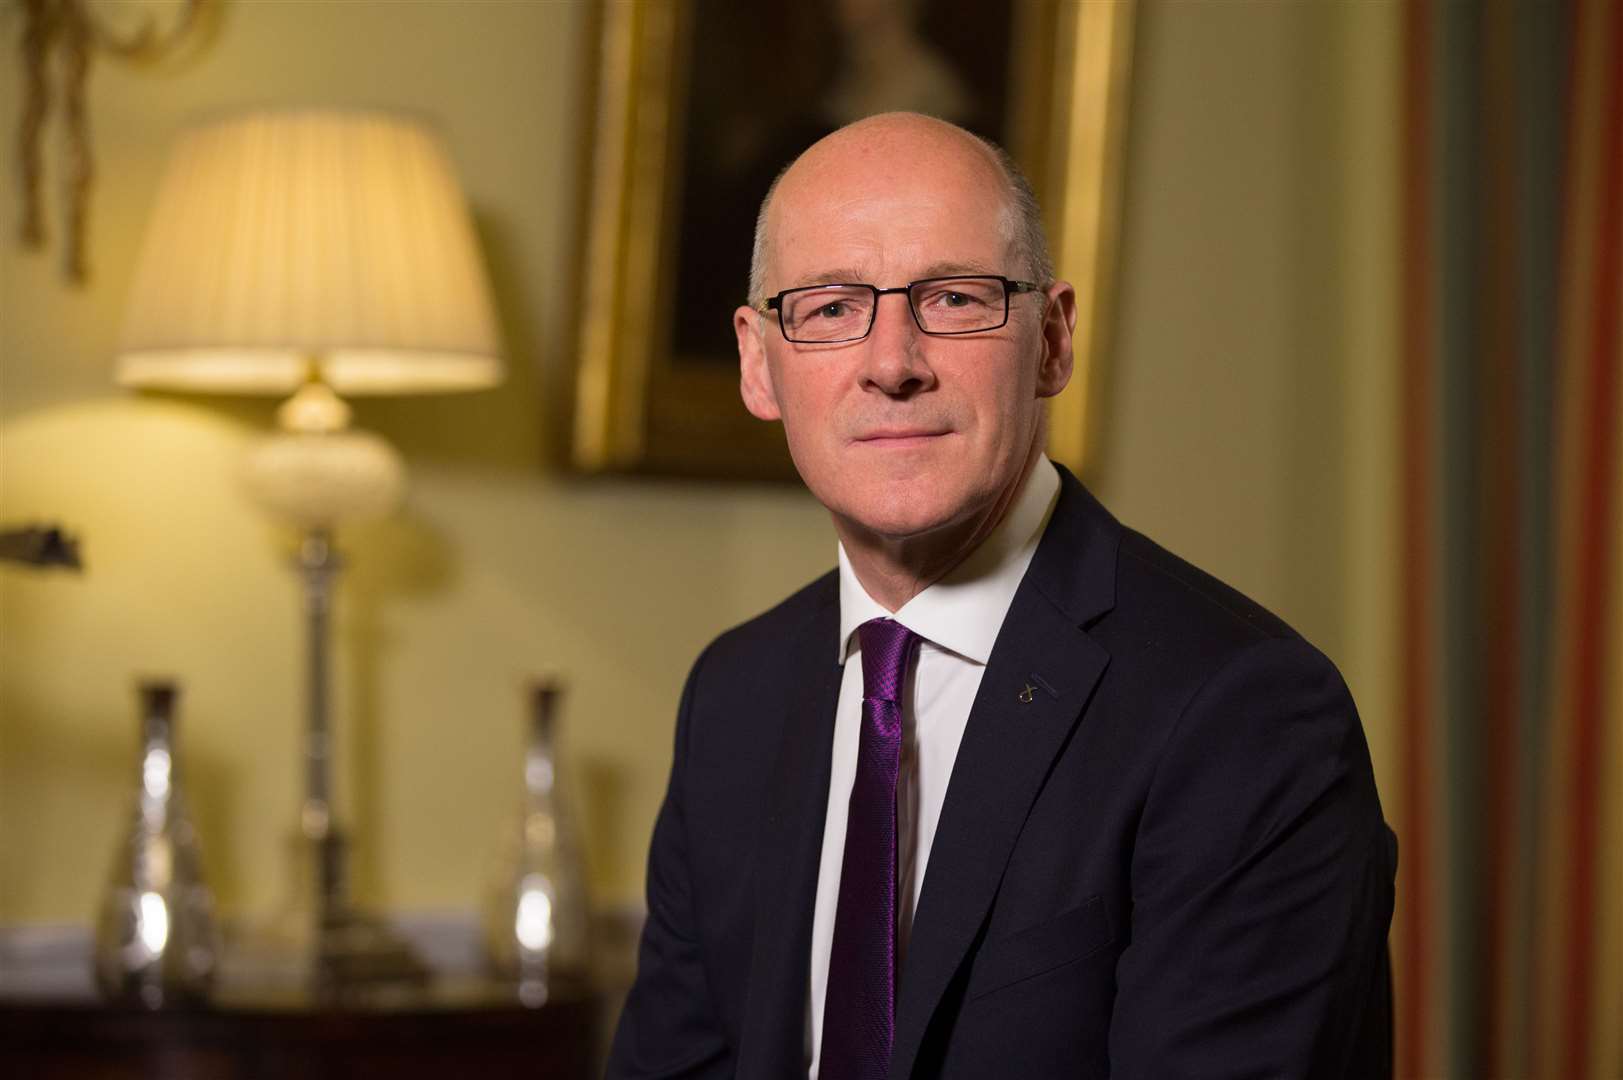 John Swinney: 'The message is clear. They don’t just want an apology. They want to see this fixed.'